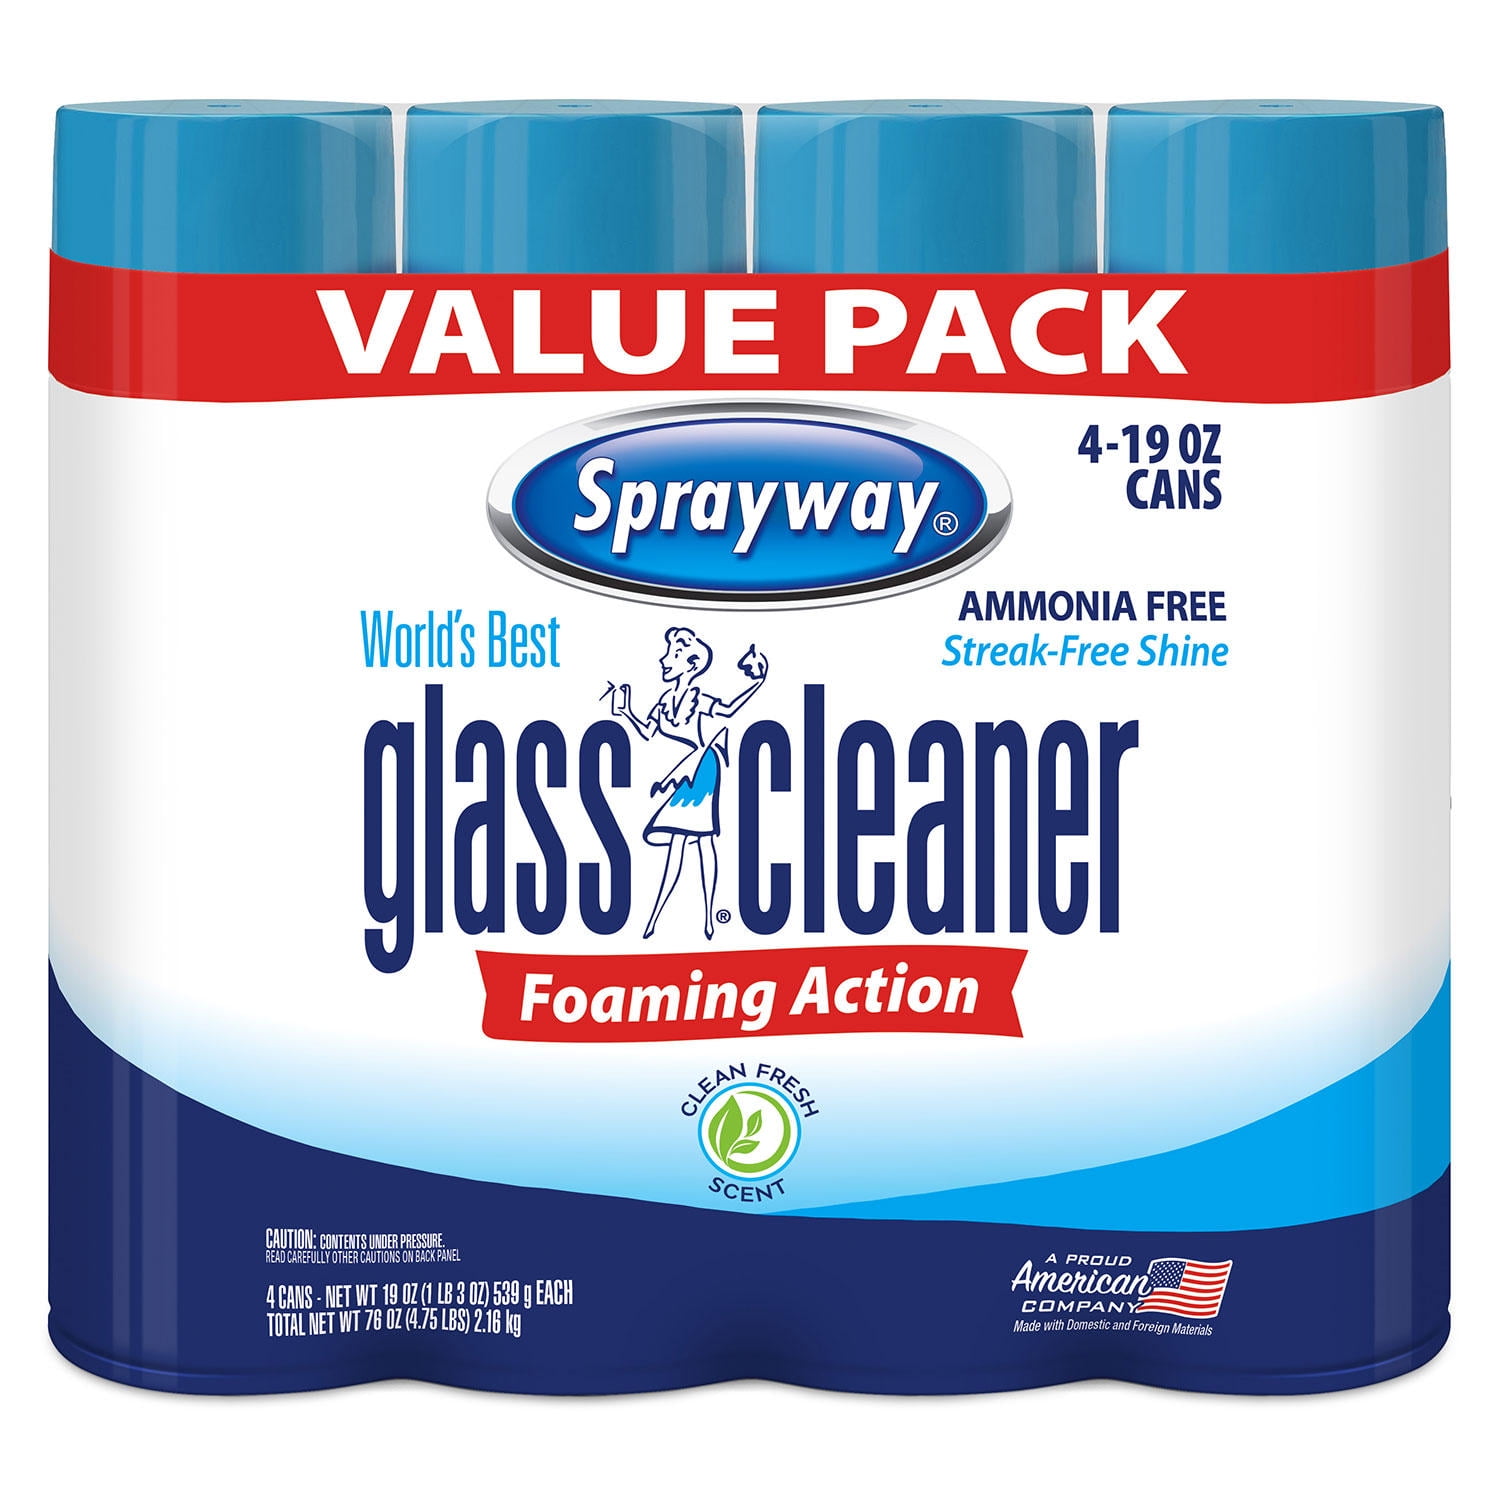 Sprayway Glass Cleaner, Foam Action, 19 Fl Oz, 3 Pack, Bundled With 1